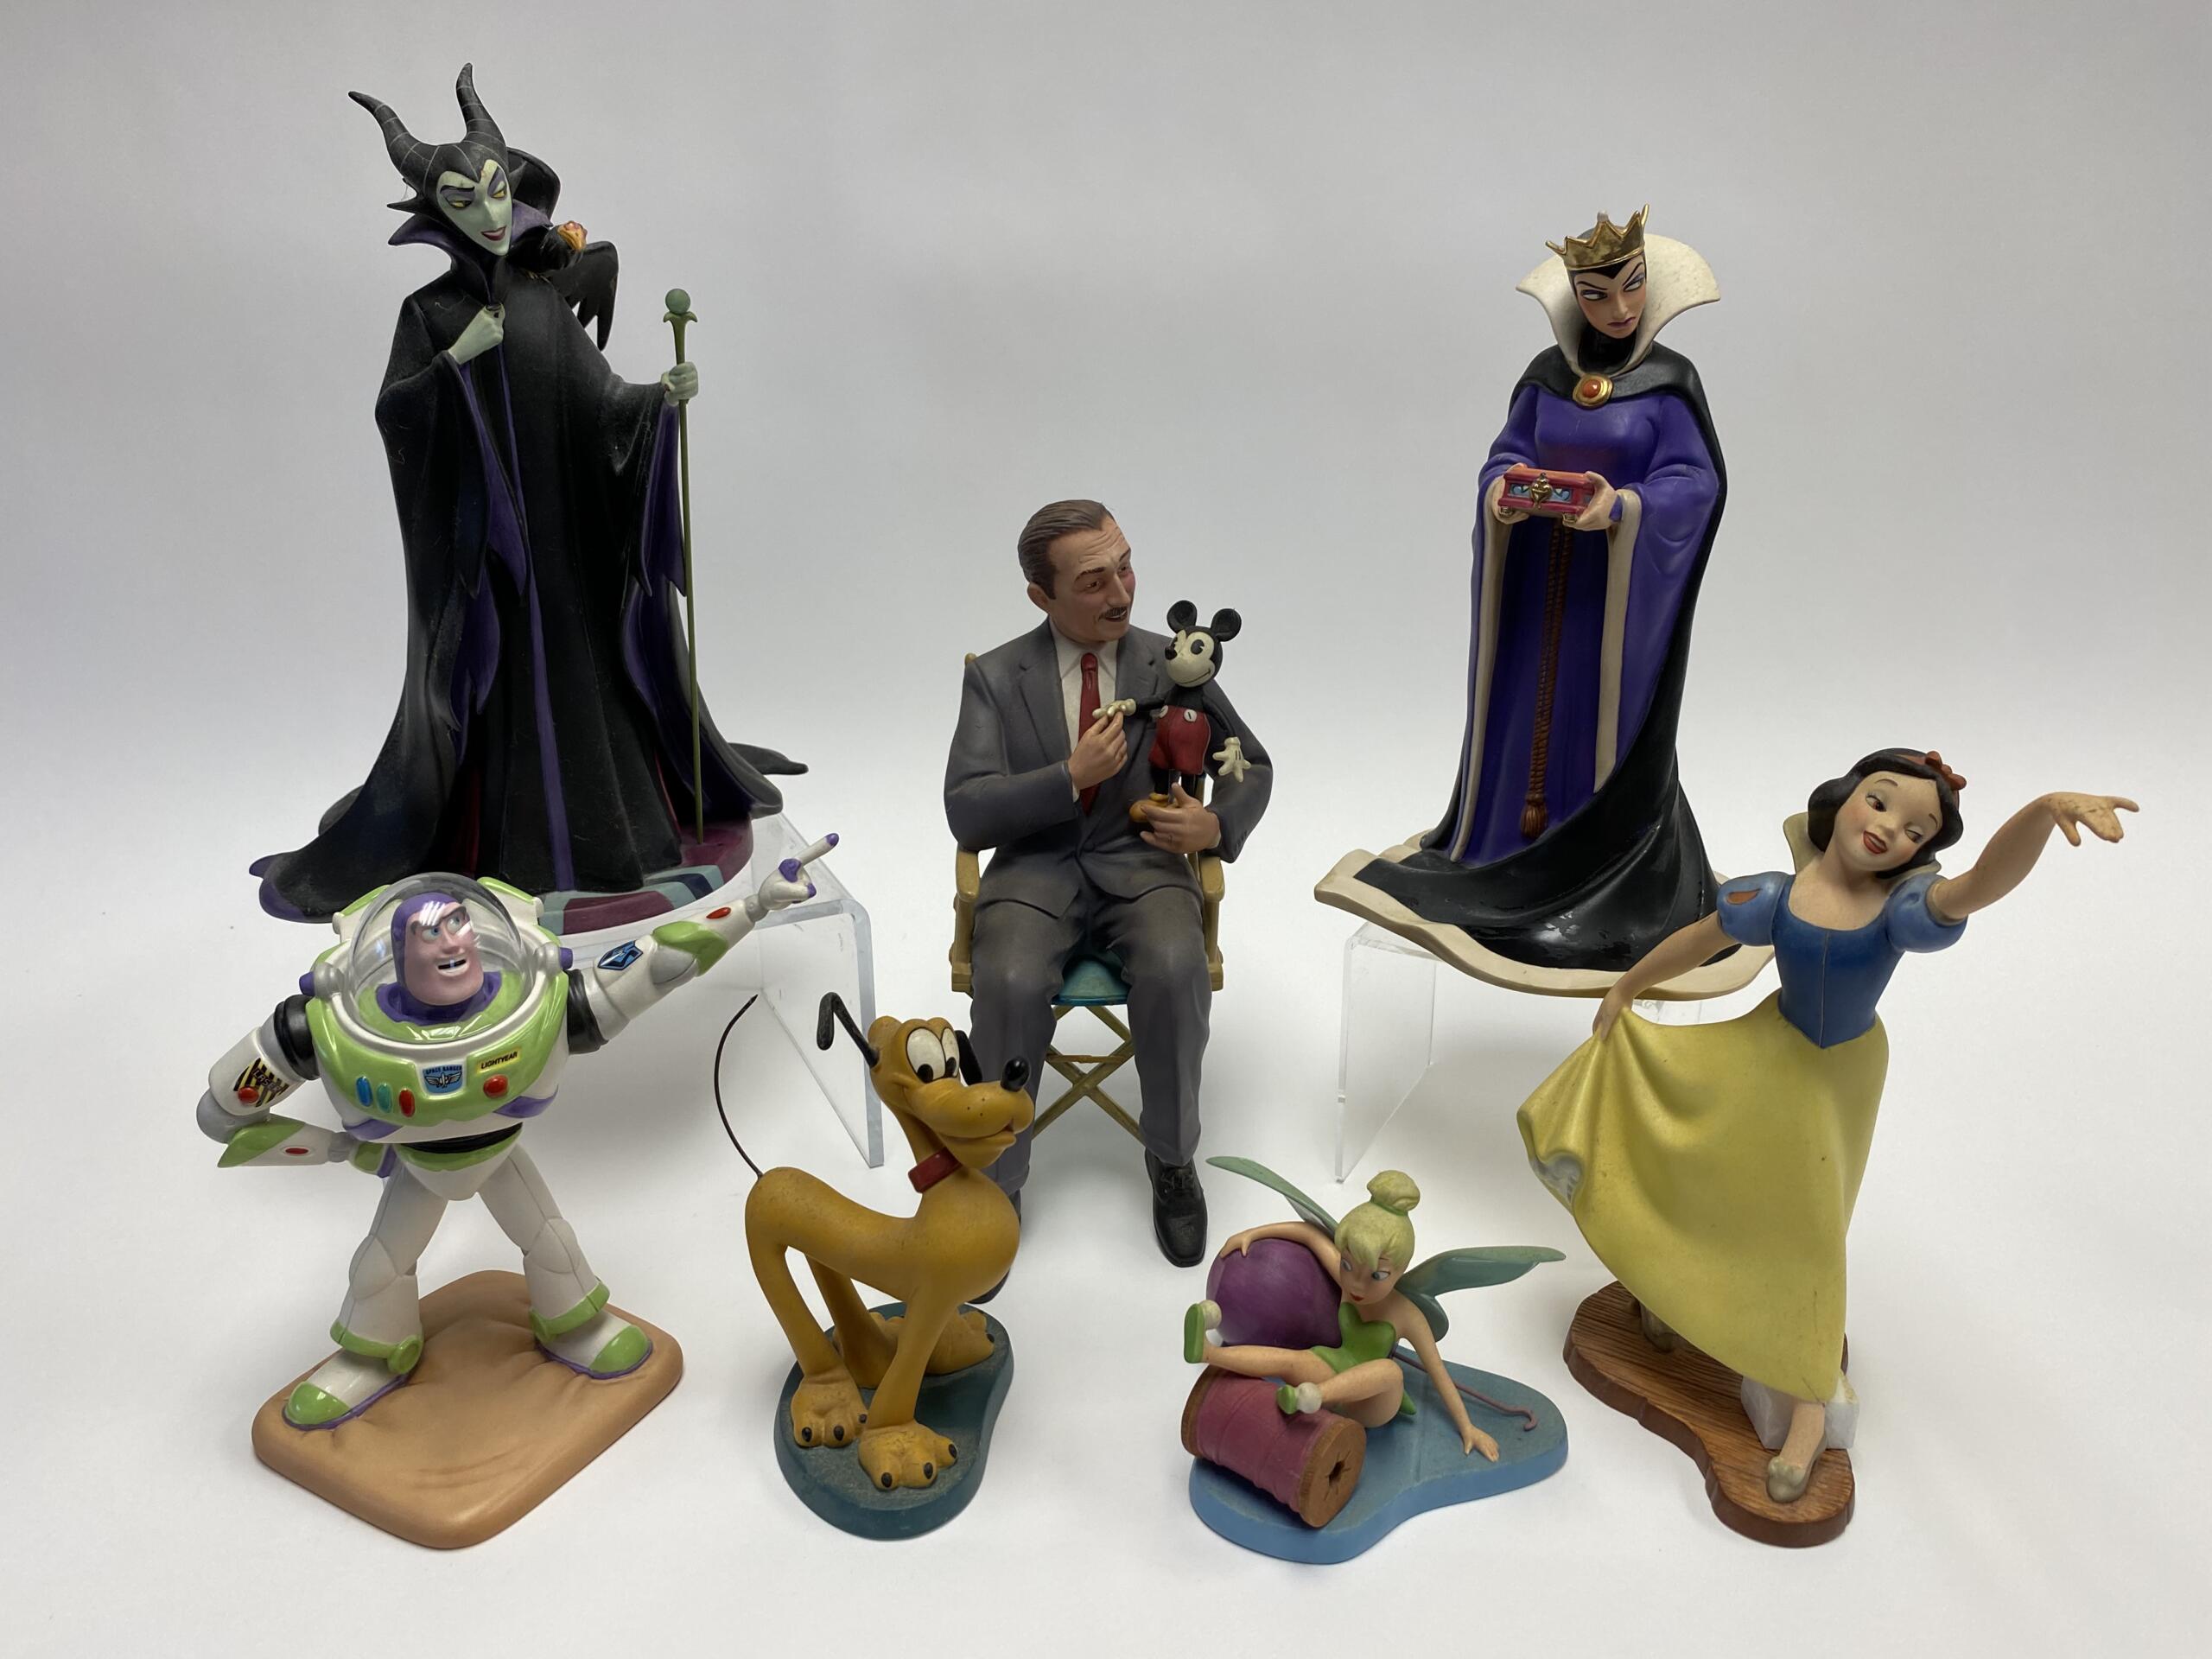 Disney Collectibles, watches, delicate figurines - Tom Hall Auctions, Inc.